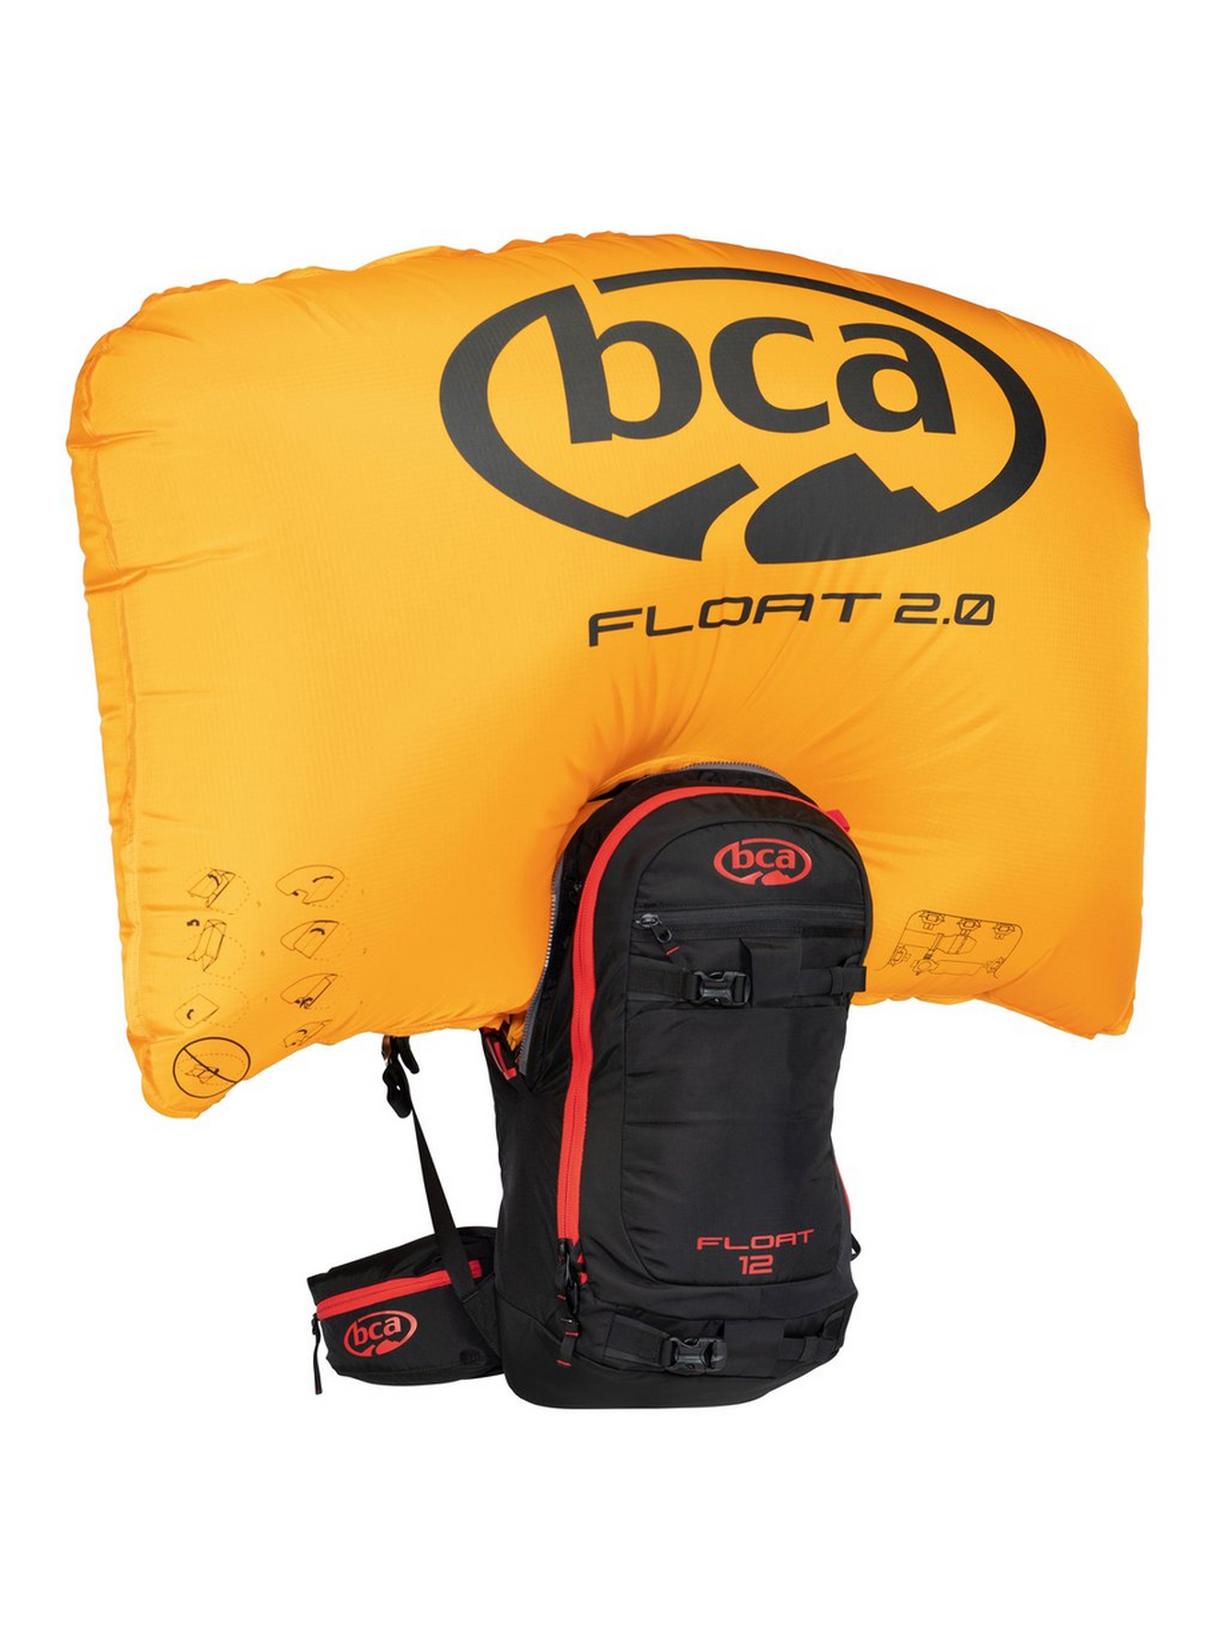 BCA Float 12 Avalanche Airbag 2.0 - Ascent Outdoors LLC